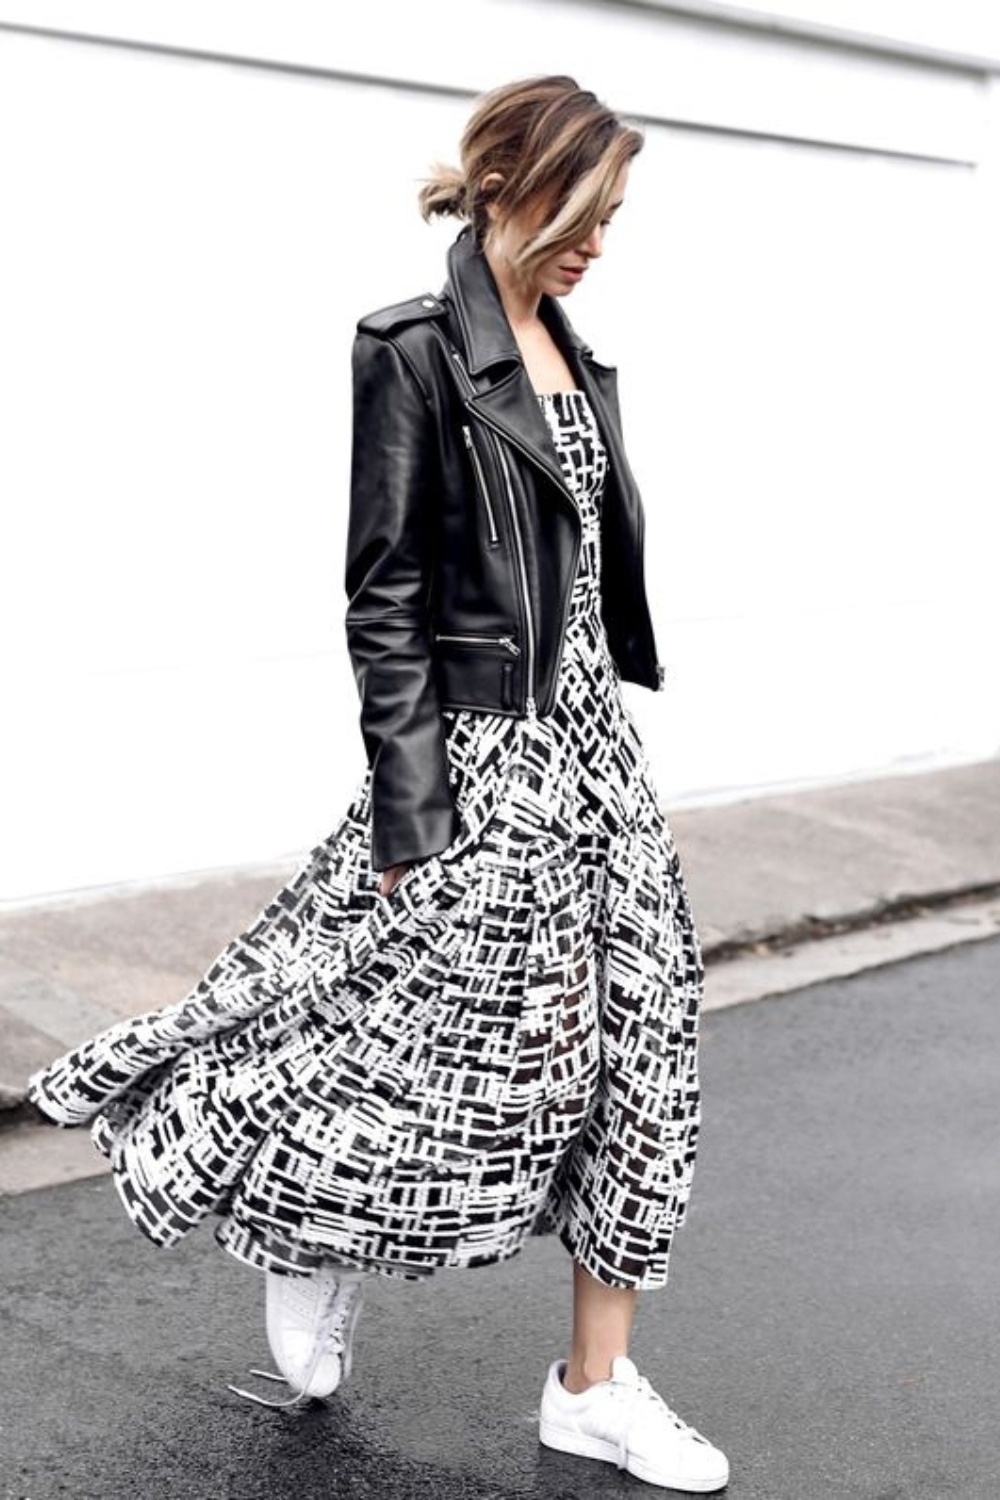 Black Leather Jacket with    maxi dress and sneakers outfit